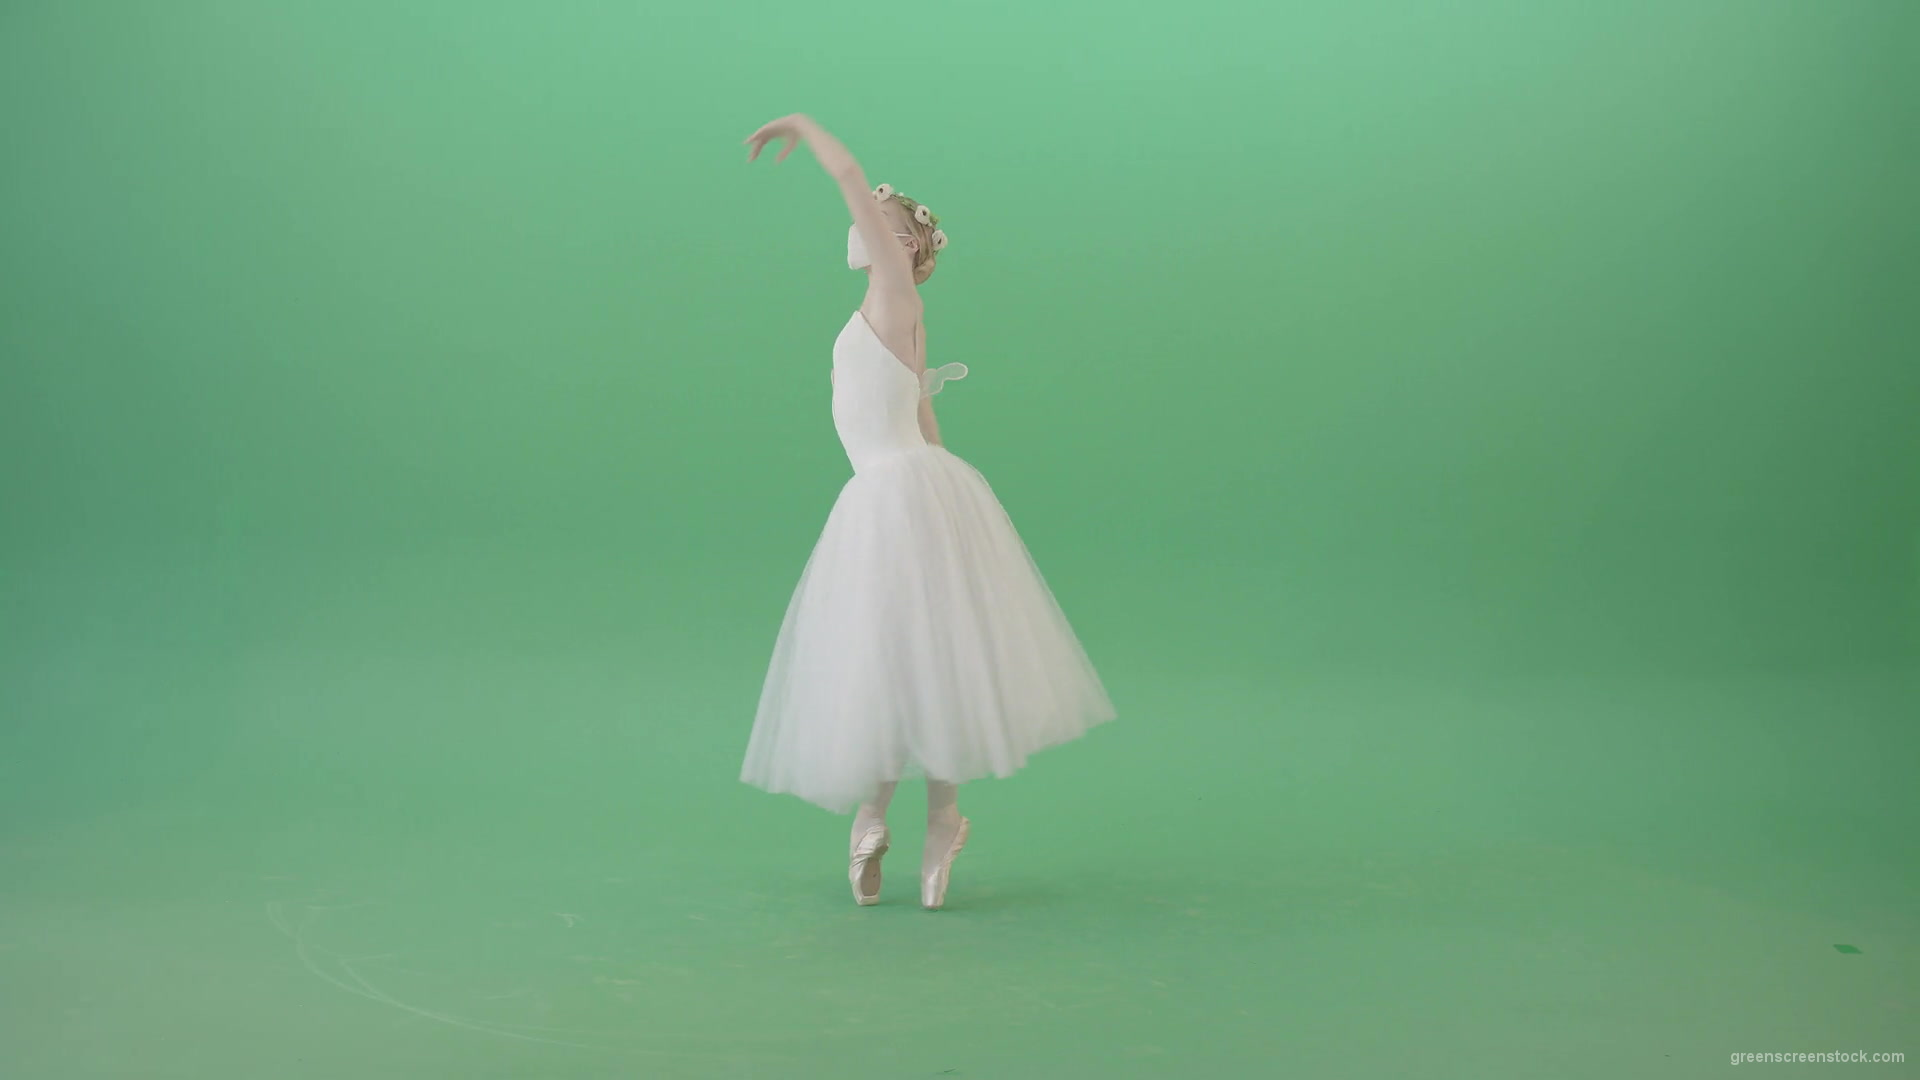 Ballet-Dance-young-woman-welcome-Corona-Virus-dancing-in-mask-isolated-on-green-screen-4K-Video-Footage-1920_006 Green Screen Stock